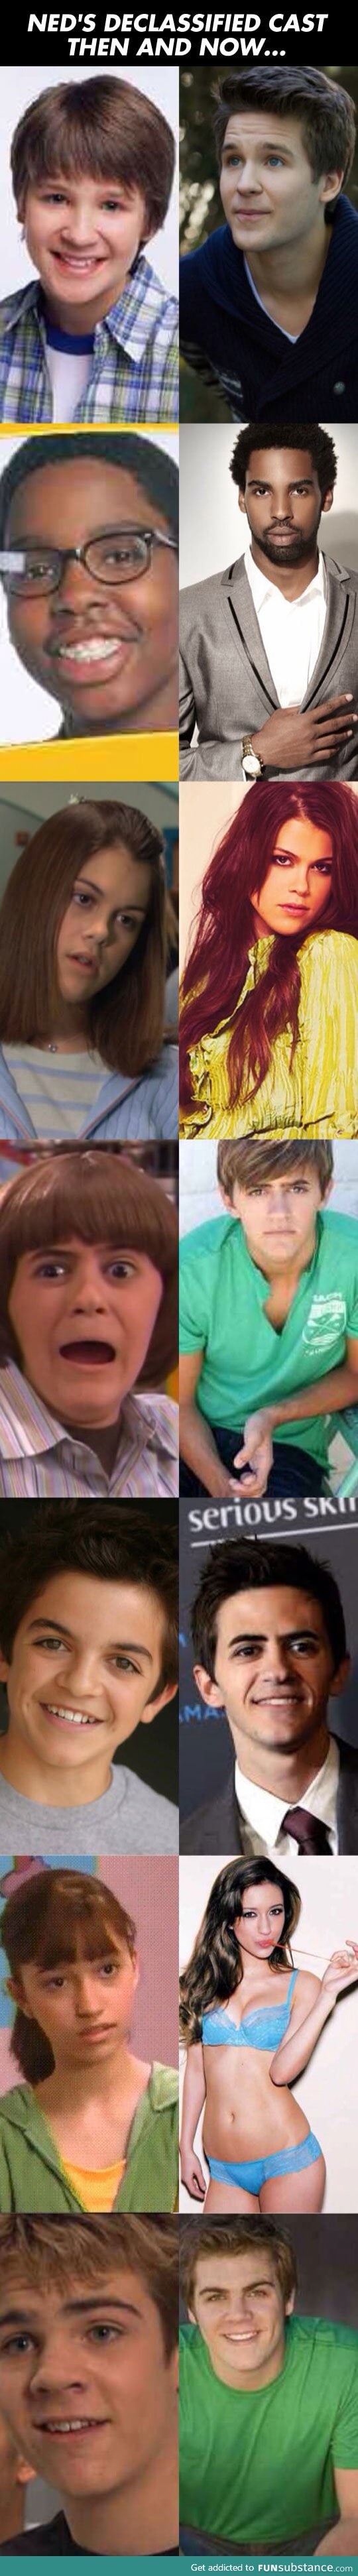 Ned's declassified cast then and now